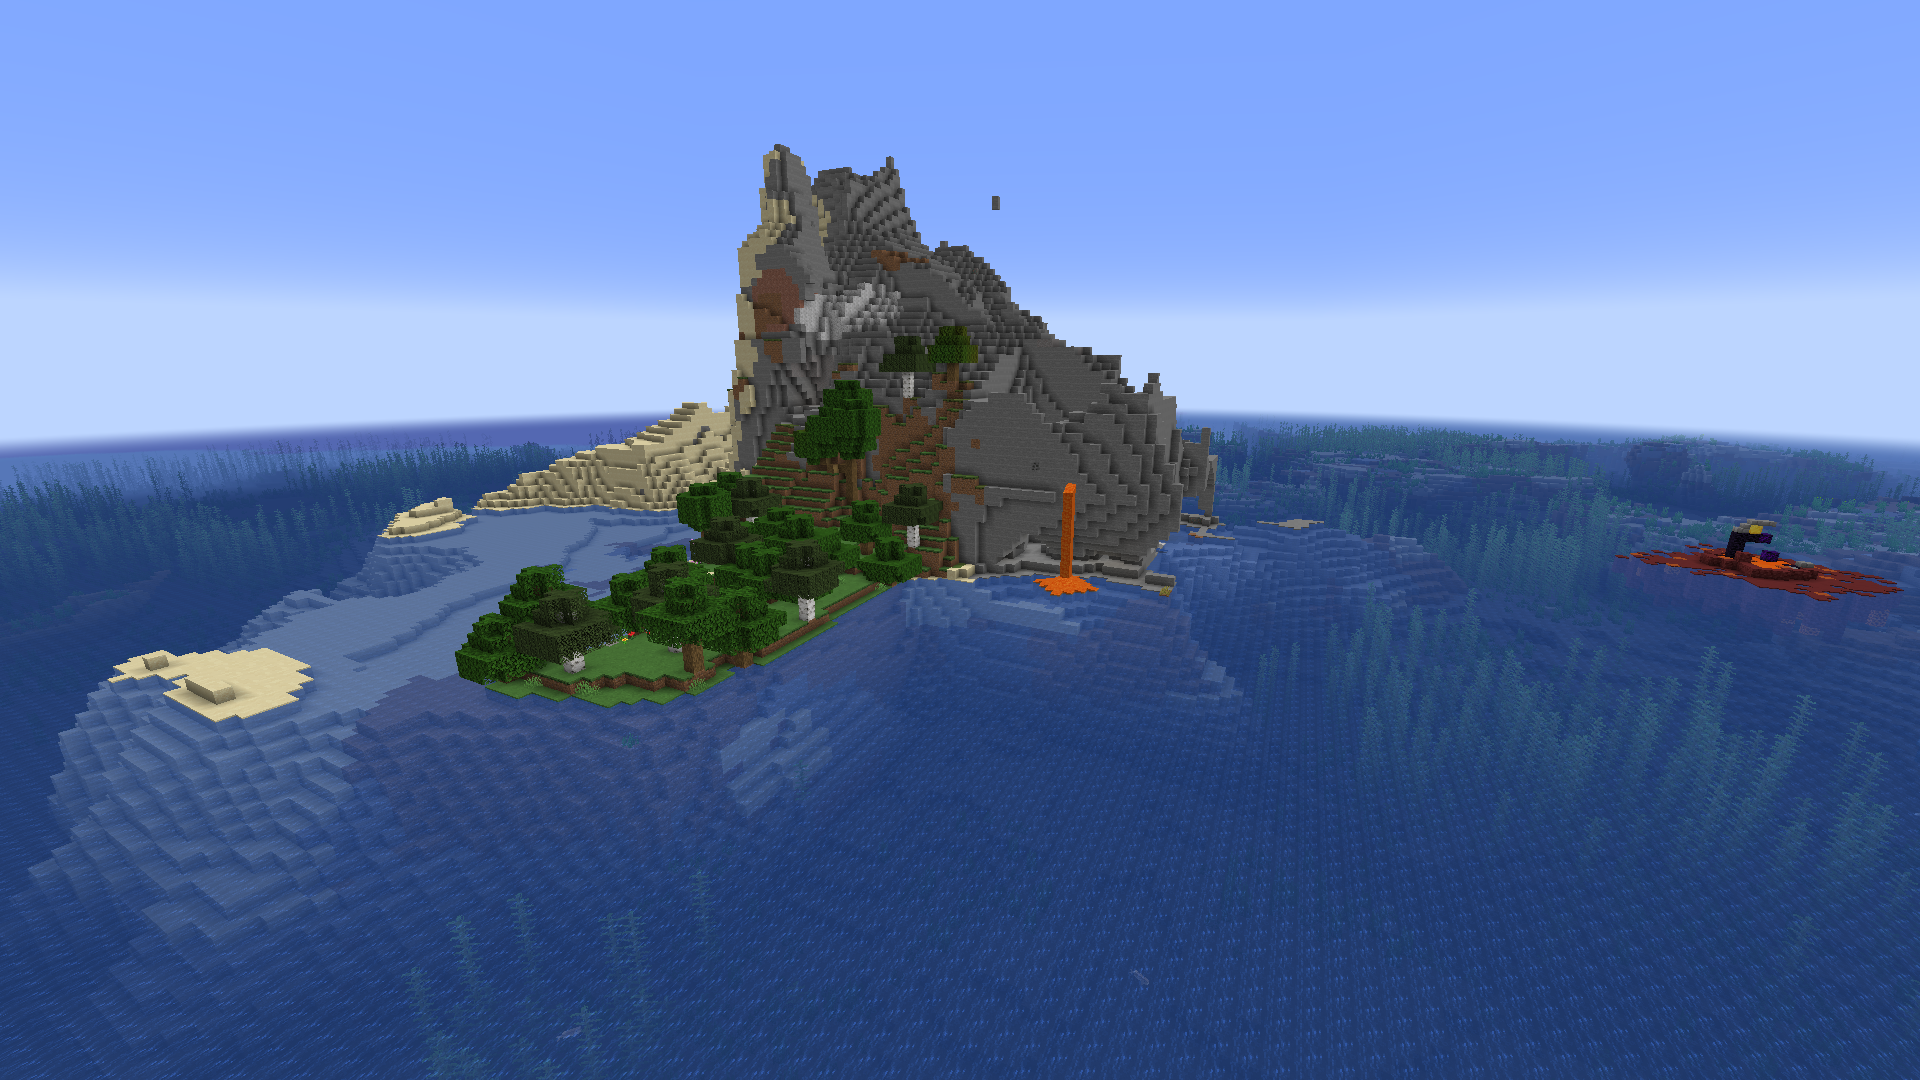 Island In Ocean with Ruined Portal by Eliminator